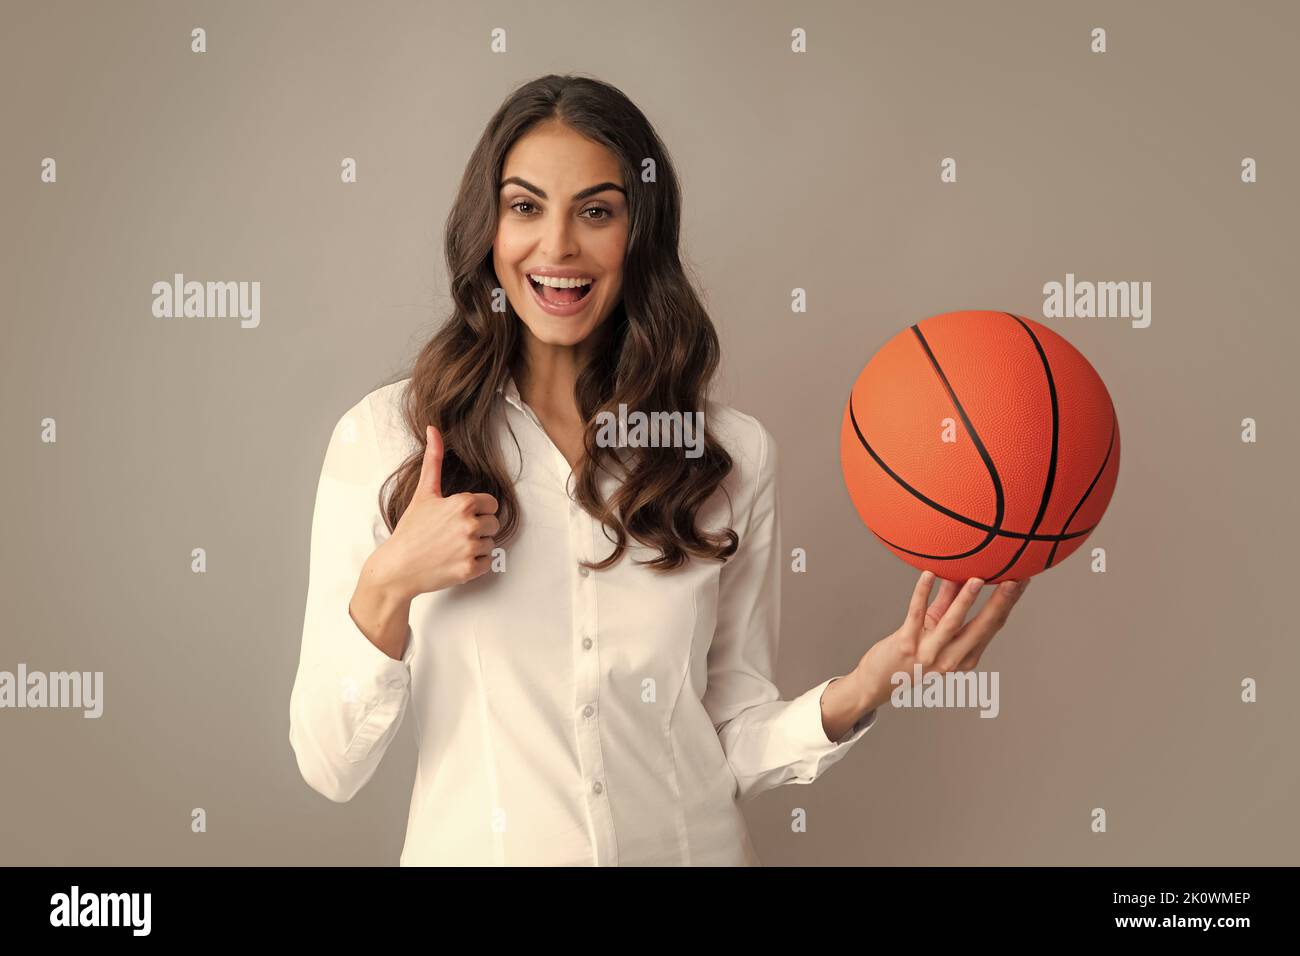 Happy woman with thumb up holding a basketball ball, isolated on gray background. Stock Photo